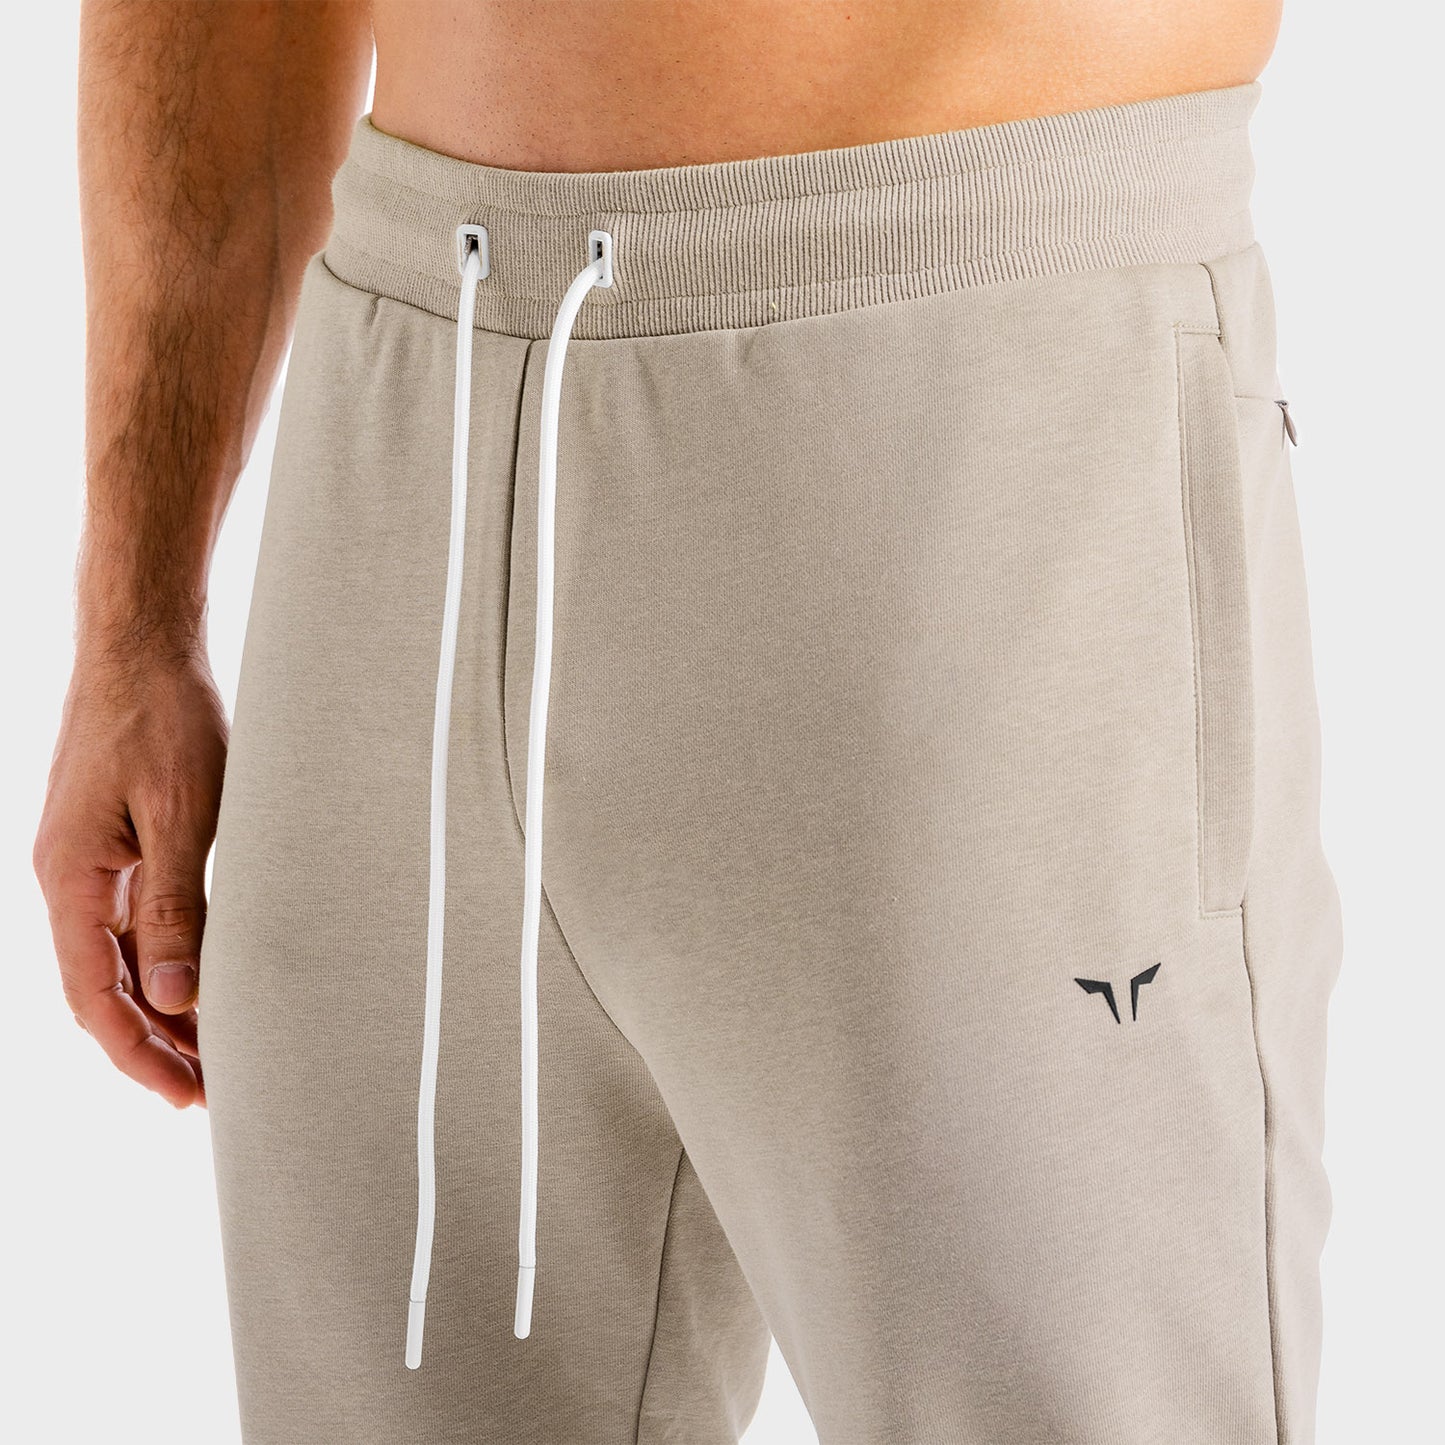 squatwolf-gym-wear-core-cuffed-joggers-taupe-workout-pants-for-men